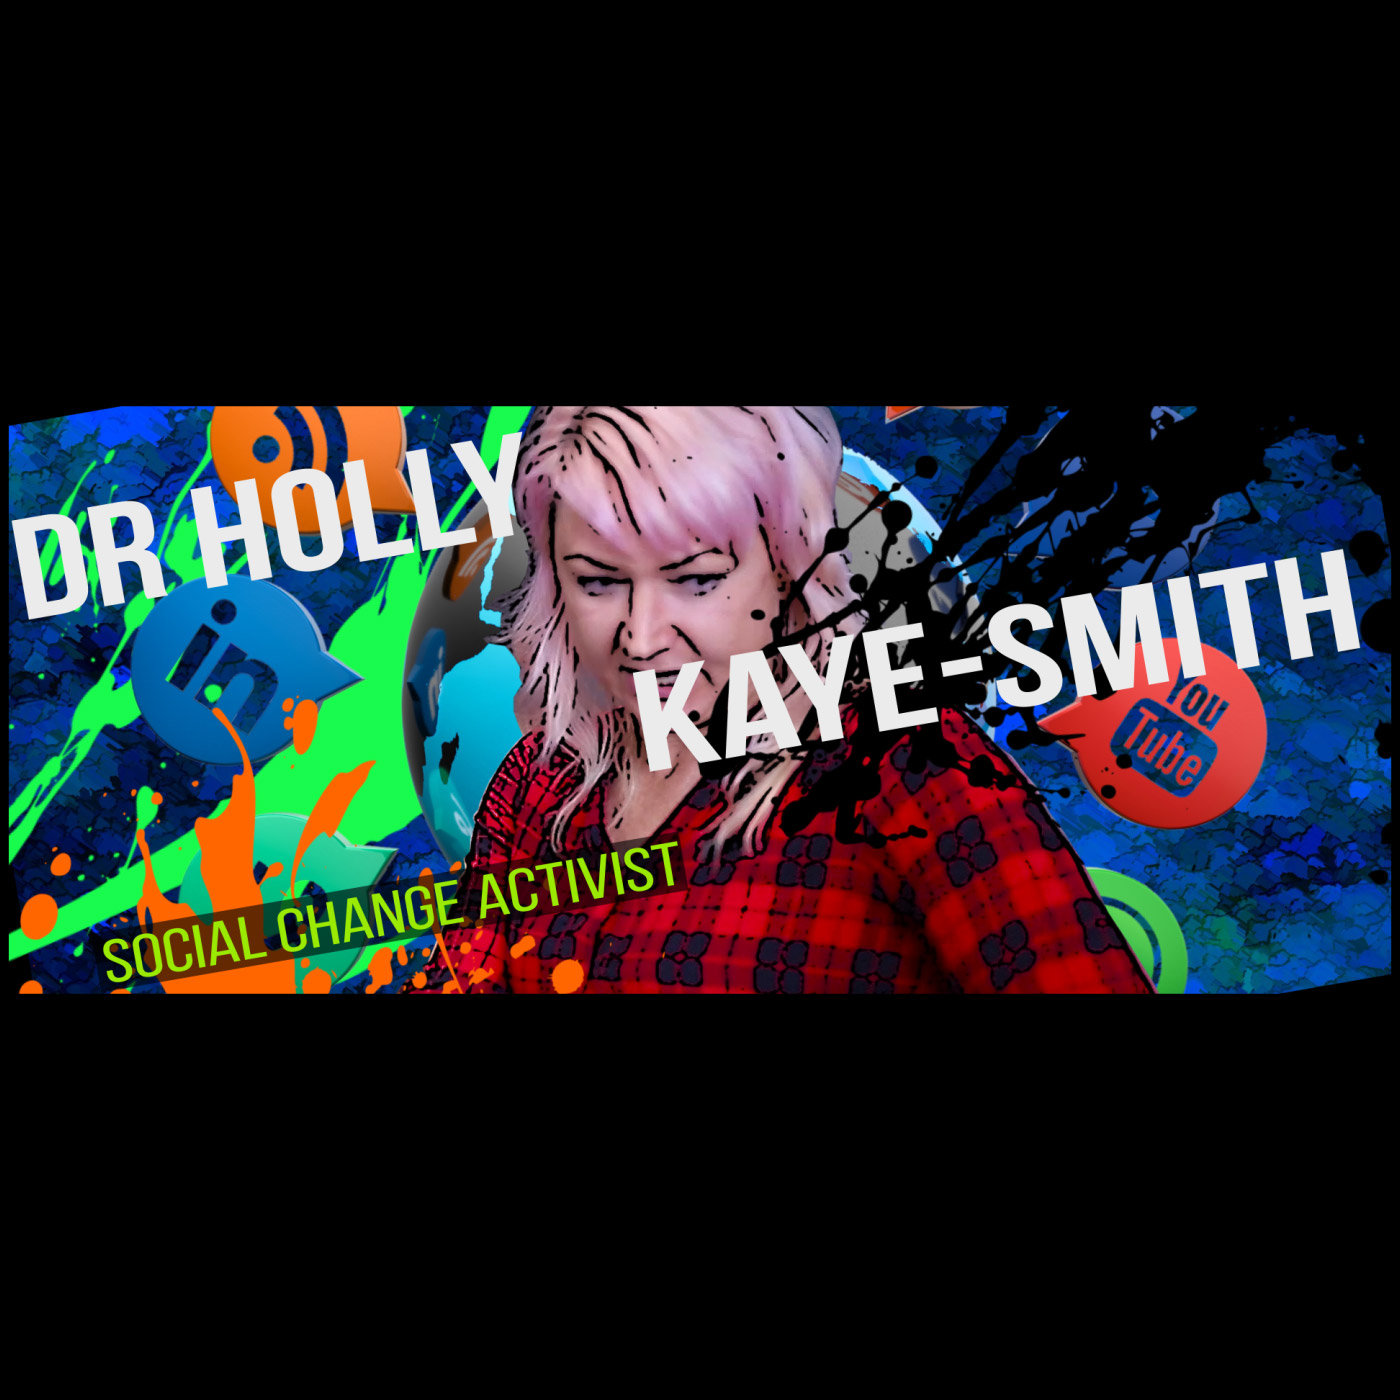 Creating Social Change with Dr Holly Kaye-Smith